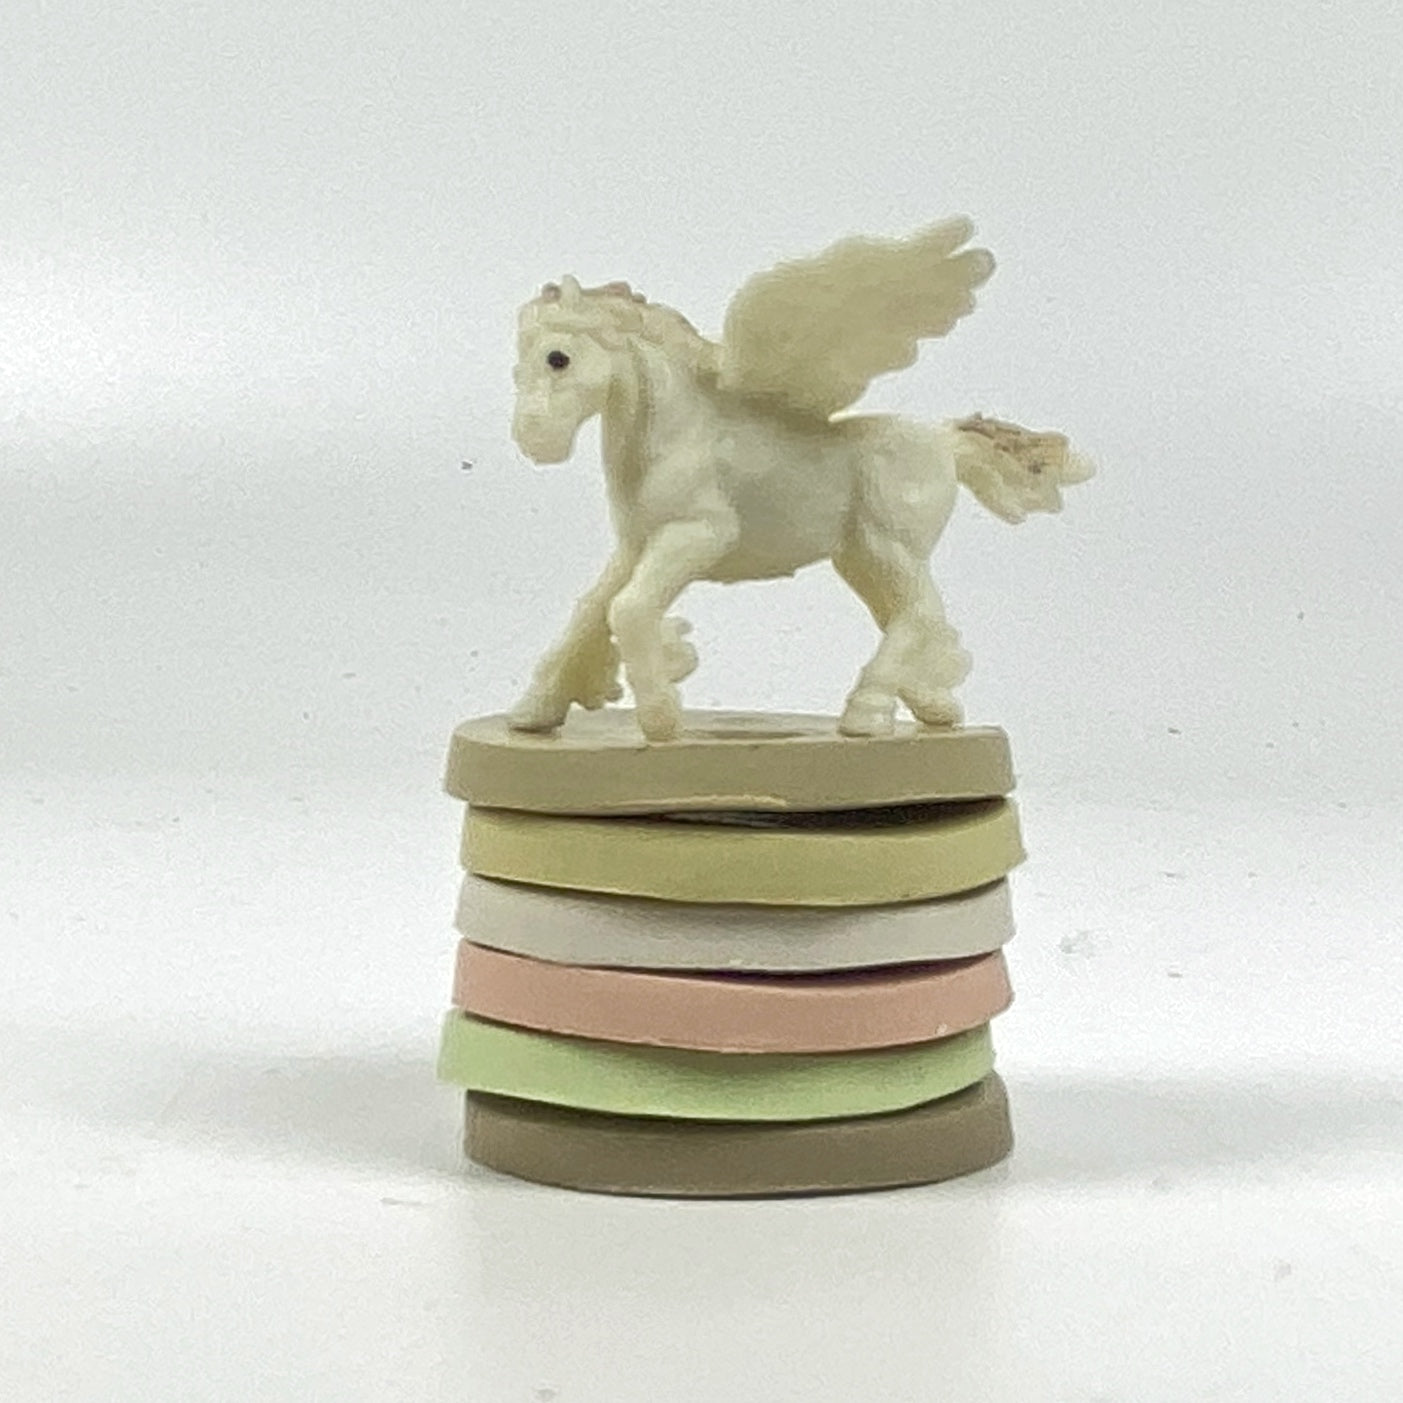 Sample clay discs in farmhouse palette colors, with a white pegasus for good luck